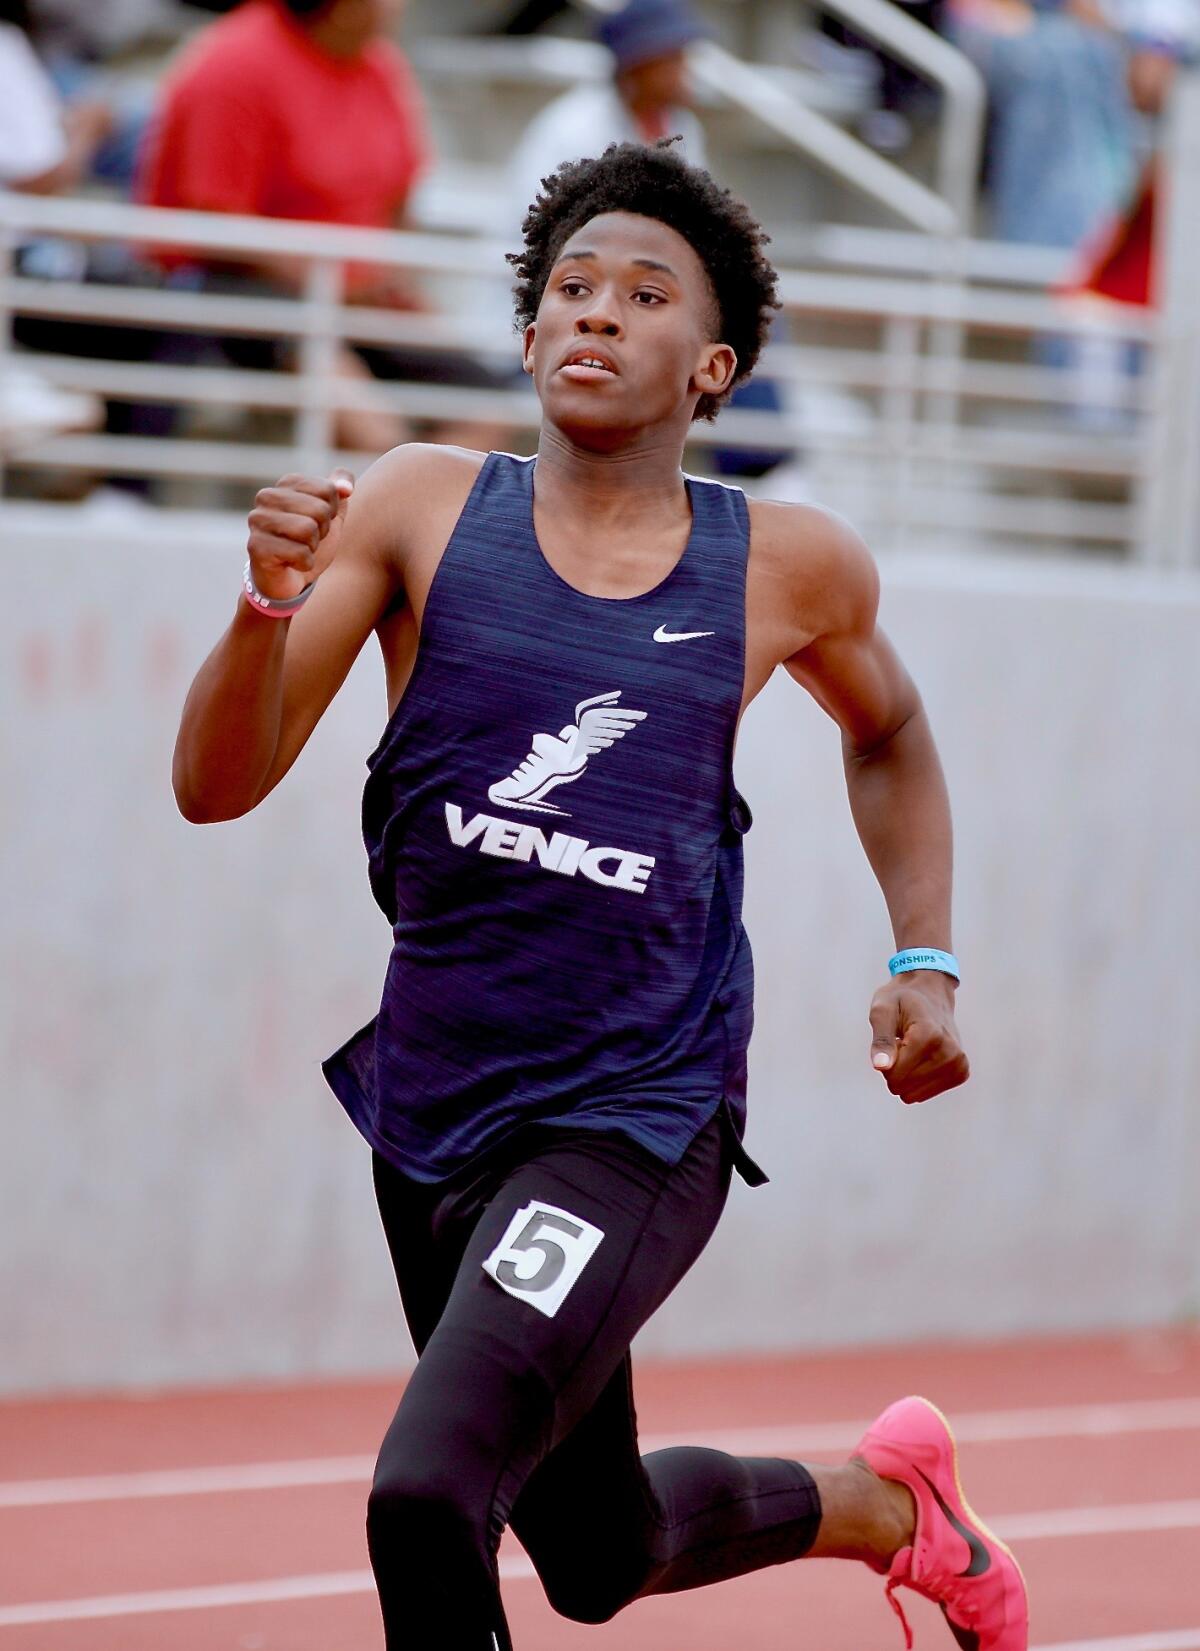 Nathan Santa Cruz of Venice led all qualifiers in the 400 meters with a time of 49.08 seconds.